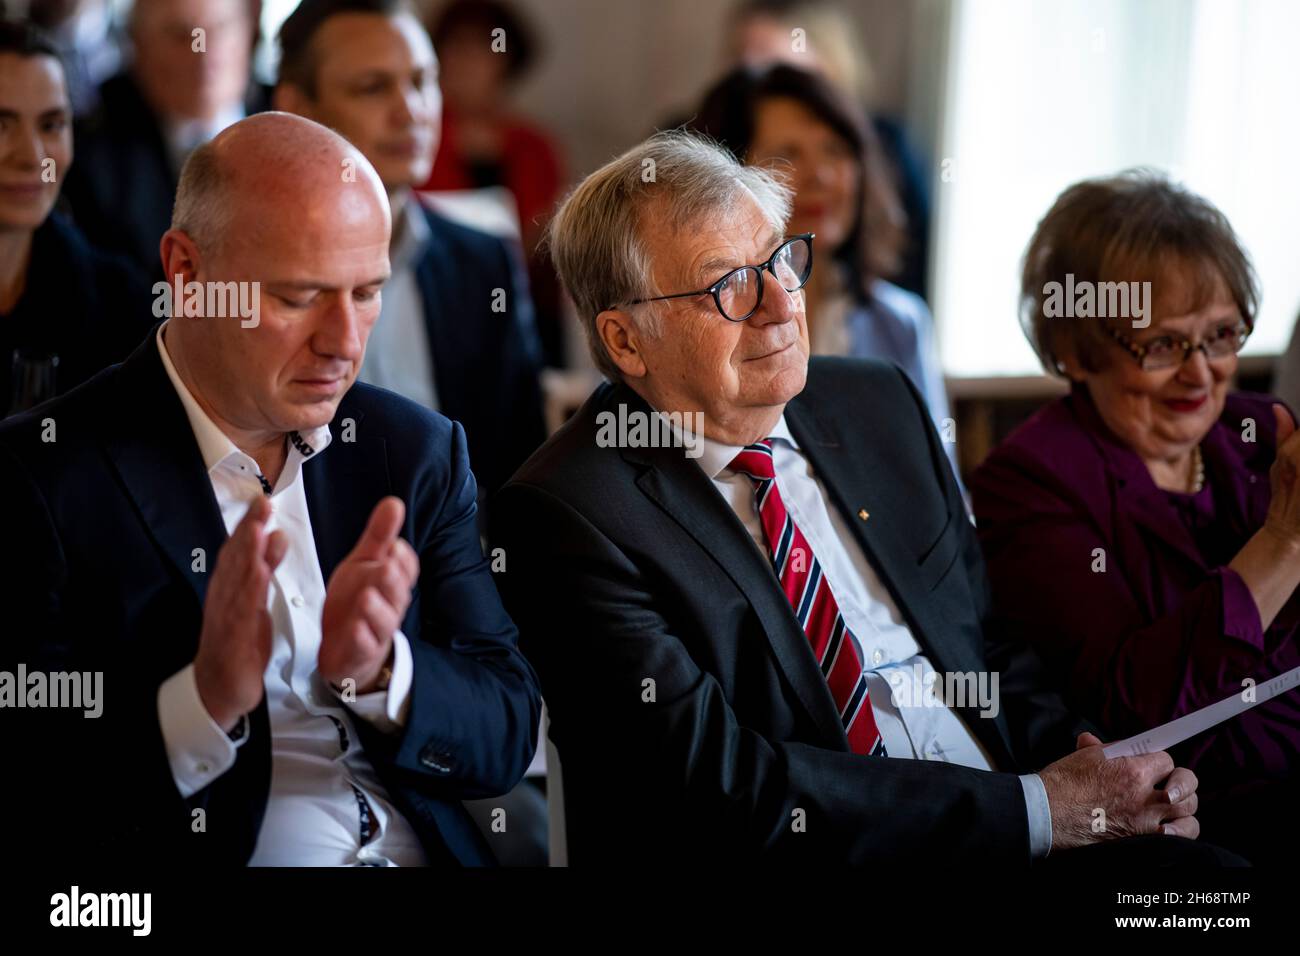 Berlin, Germany. 13th Nov, 2021. Kai Wegner (CDU, l-r), Chairman CDU Berlin, Eberhard Diepgen (CDU), Berlin's former Governing Mayor, his wife Monika Diepgen, sit together for the reception on his 80th birthday. The CDU politician Diepgen was governing mayor from 1984 to 1989 and from 1991 to 2001. Credit: Fabian Sommer/dpa/Alamy Live News Stock Photo